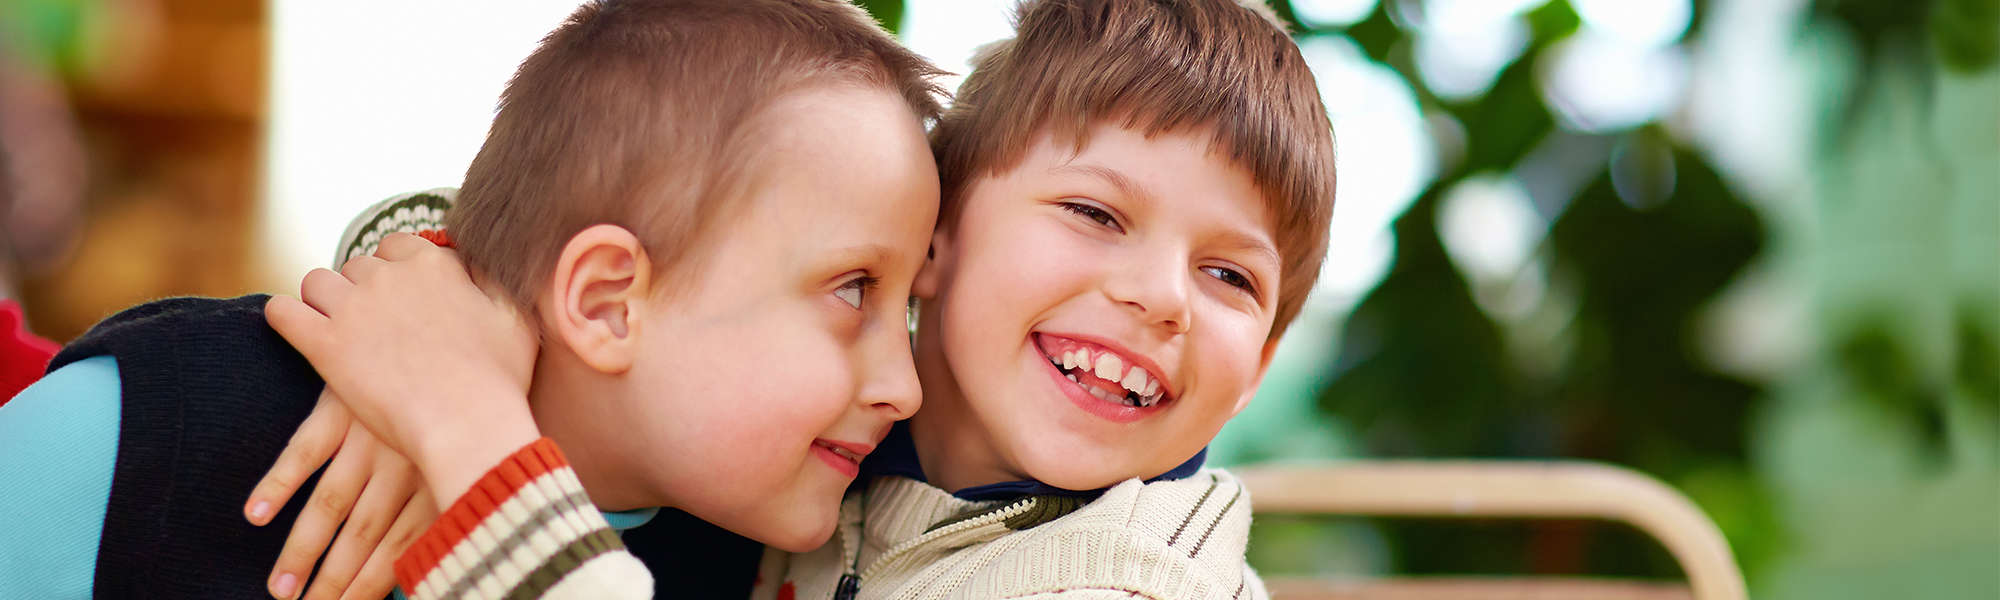 Two young boys with disabilities hug and smile widely